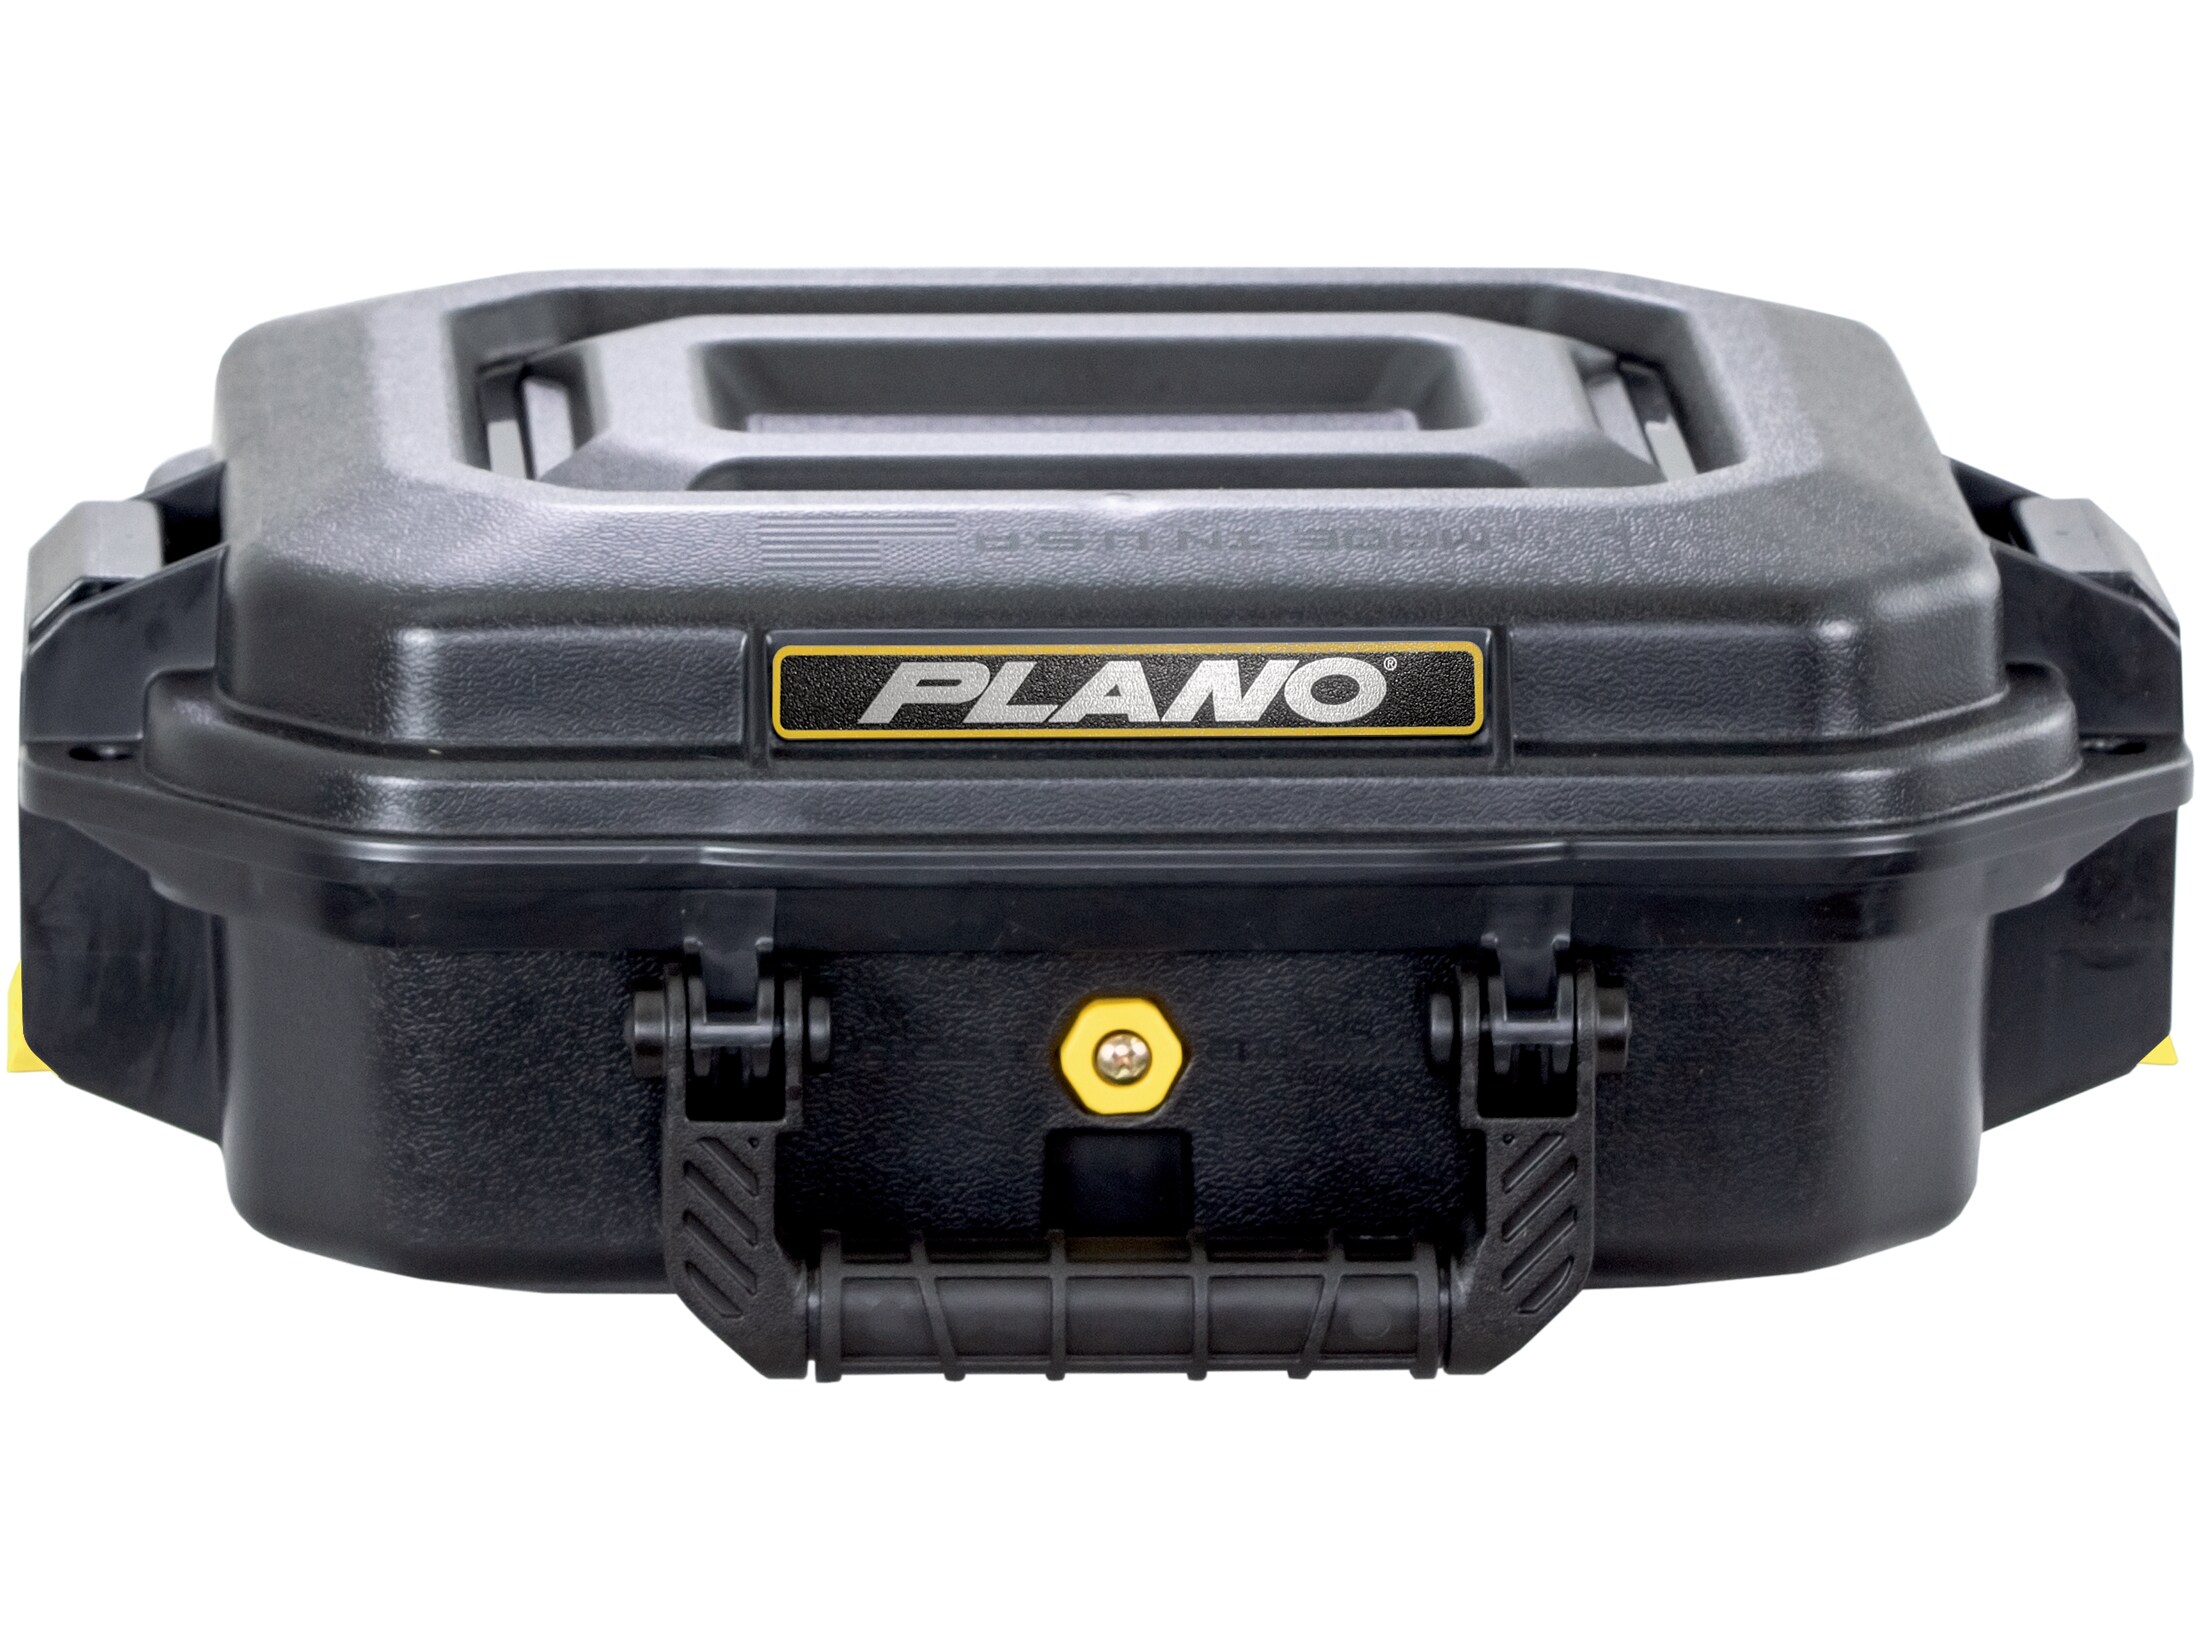 Plano AW2 All Weather Single Pistol Case Polymer Black For Sale